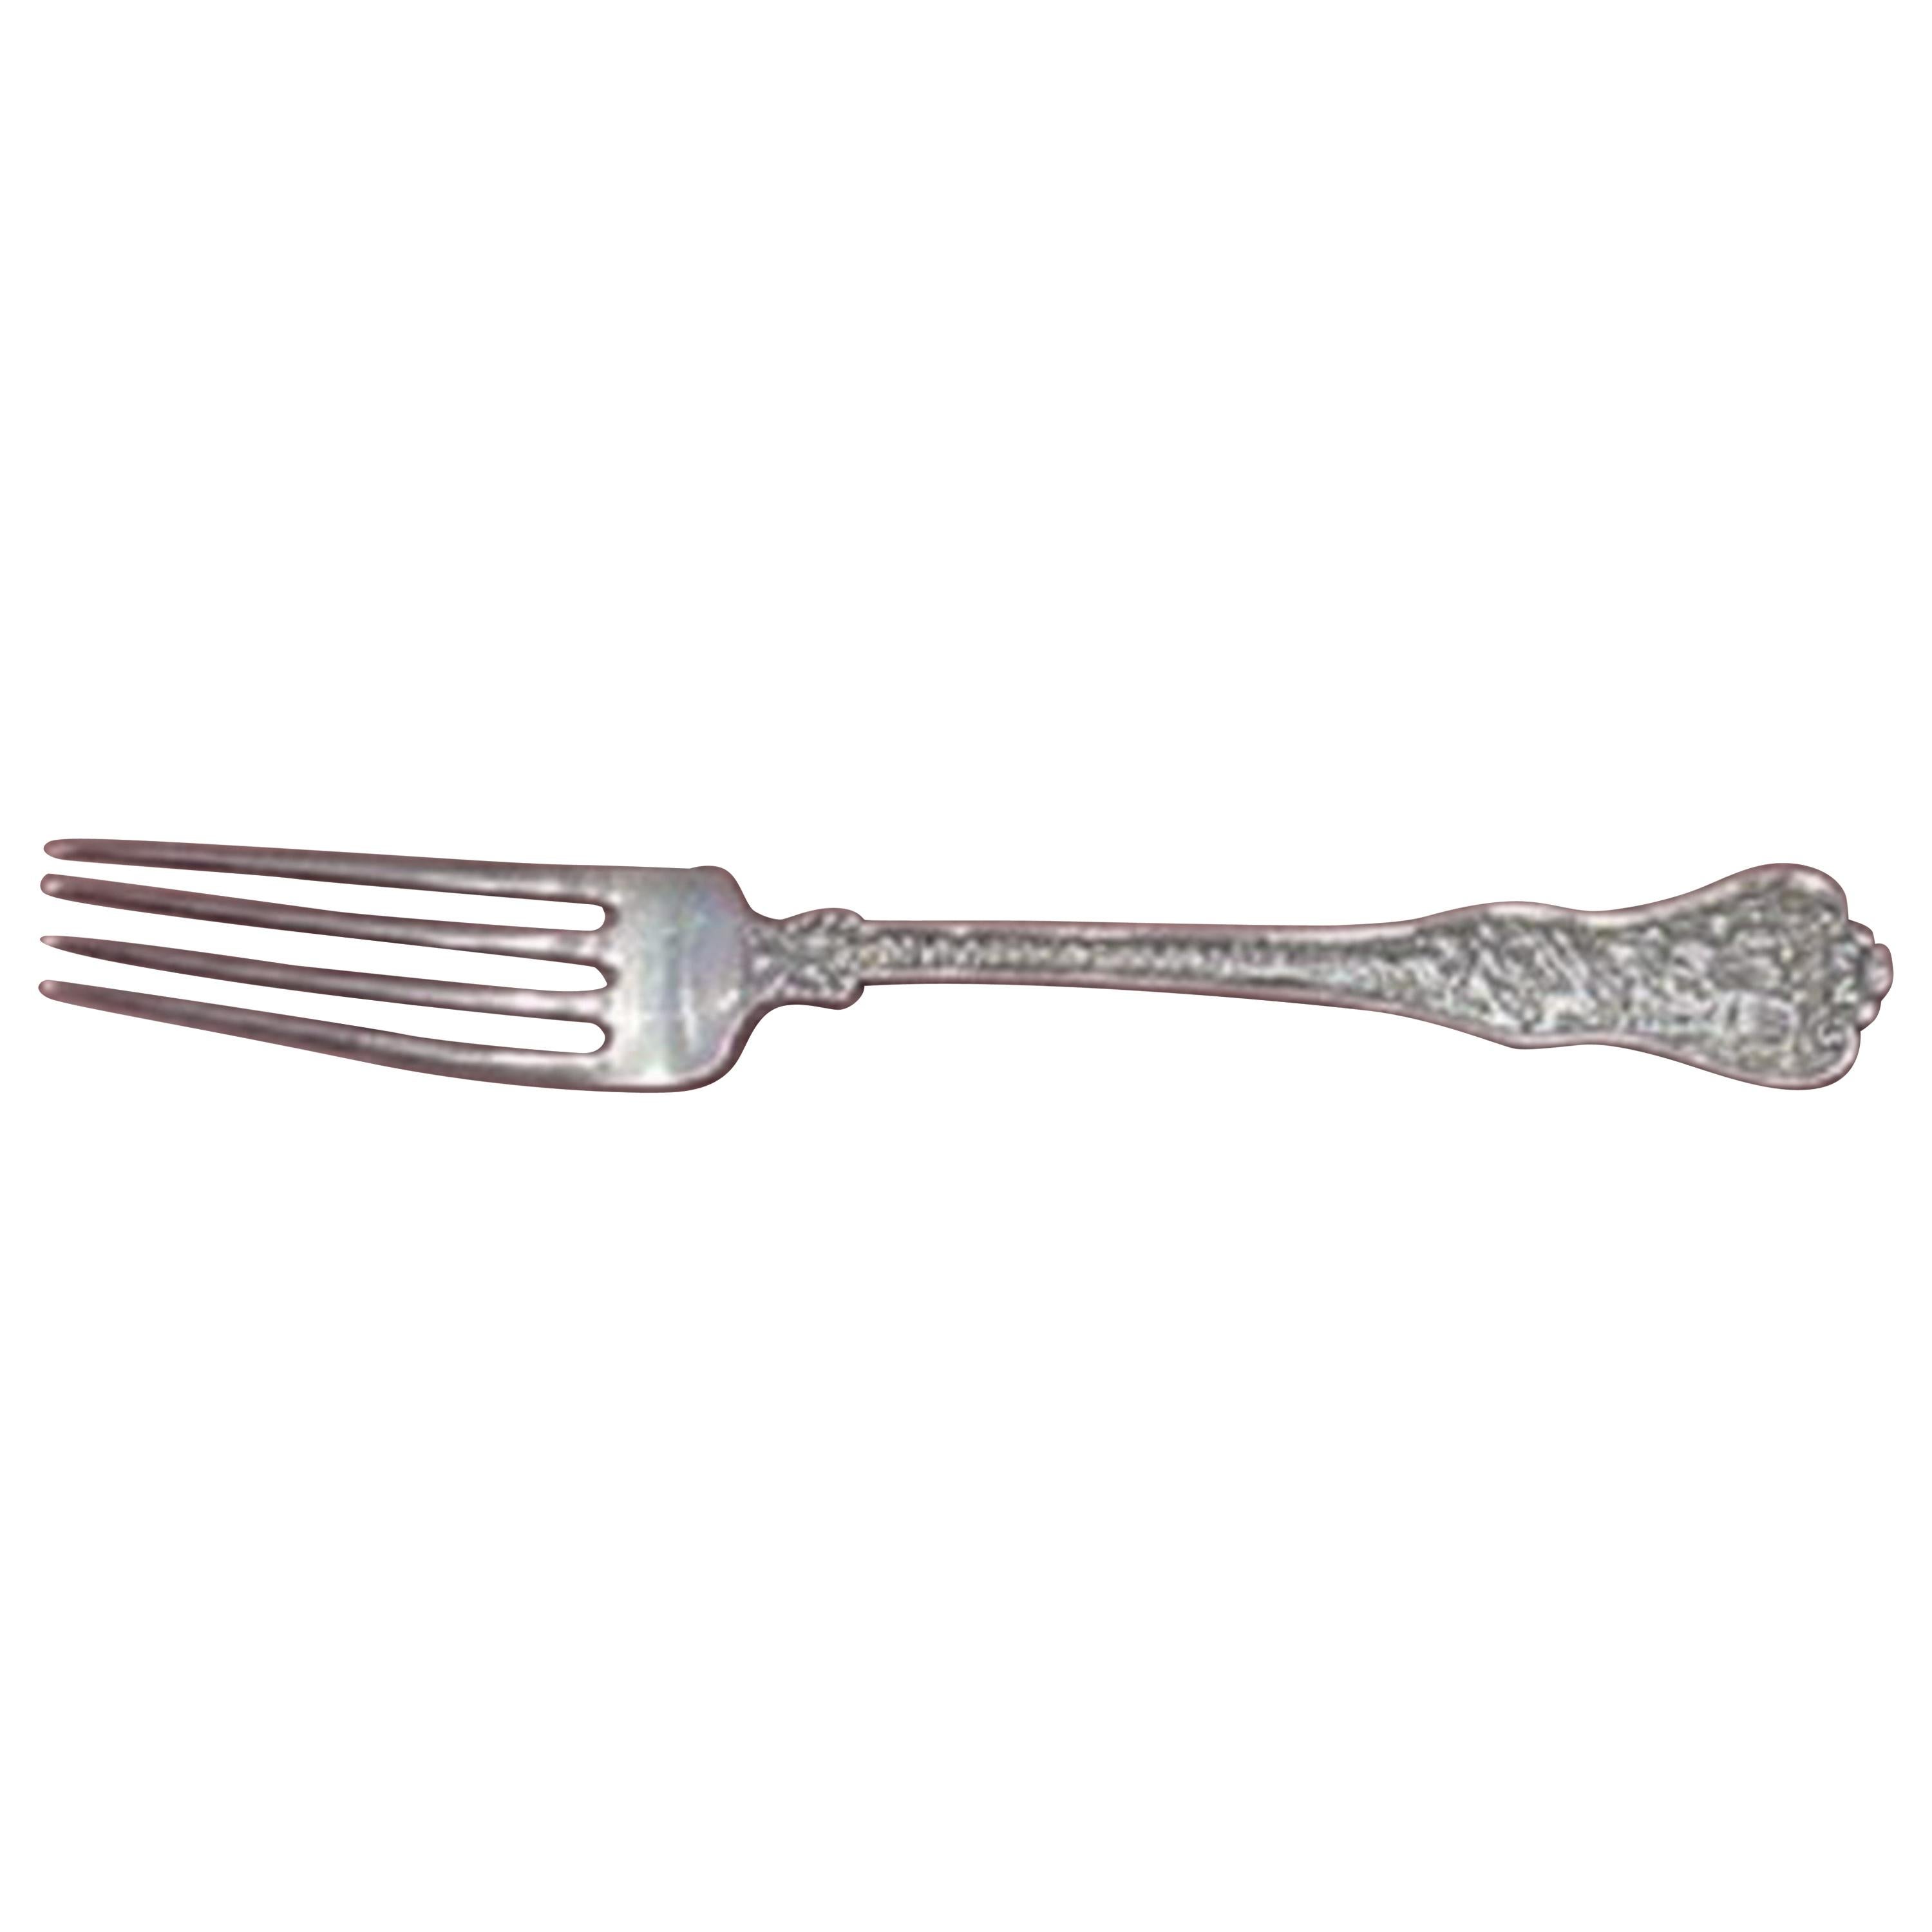 Olympian by Tiffany and Co Sterling Silver Regular Fork 4-Tine Flatware